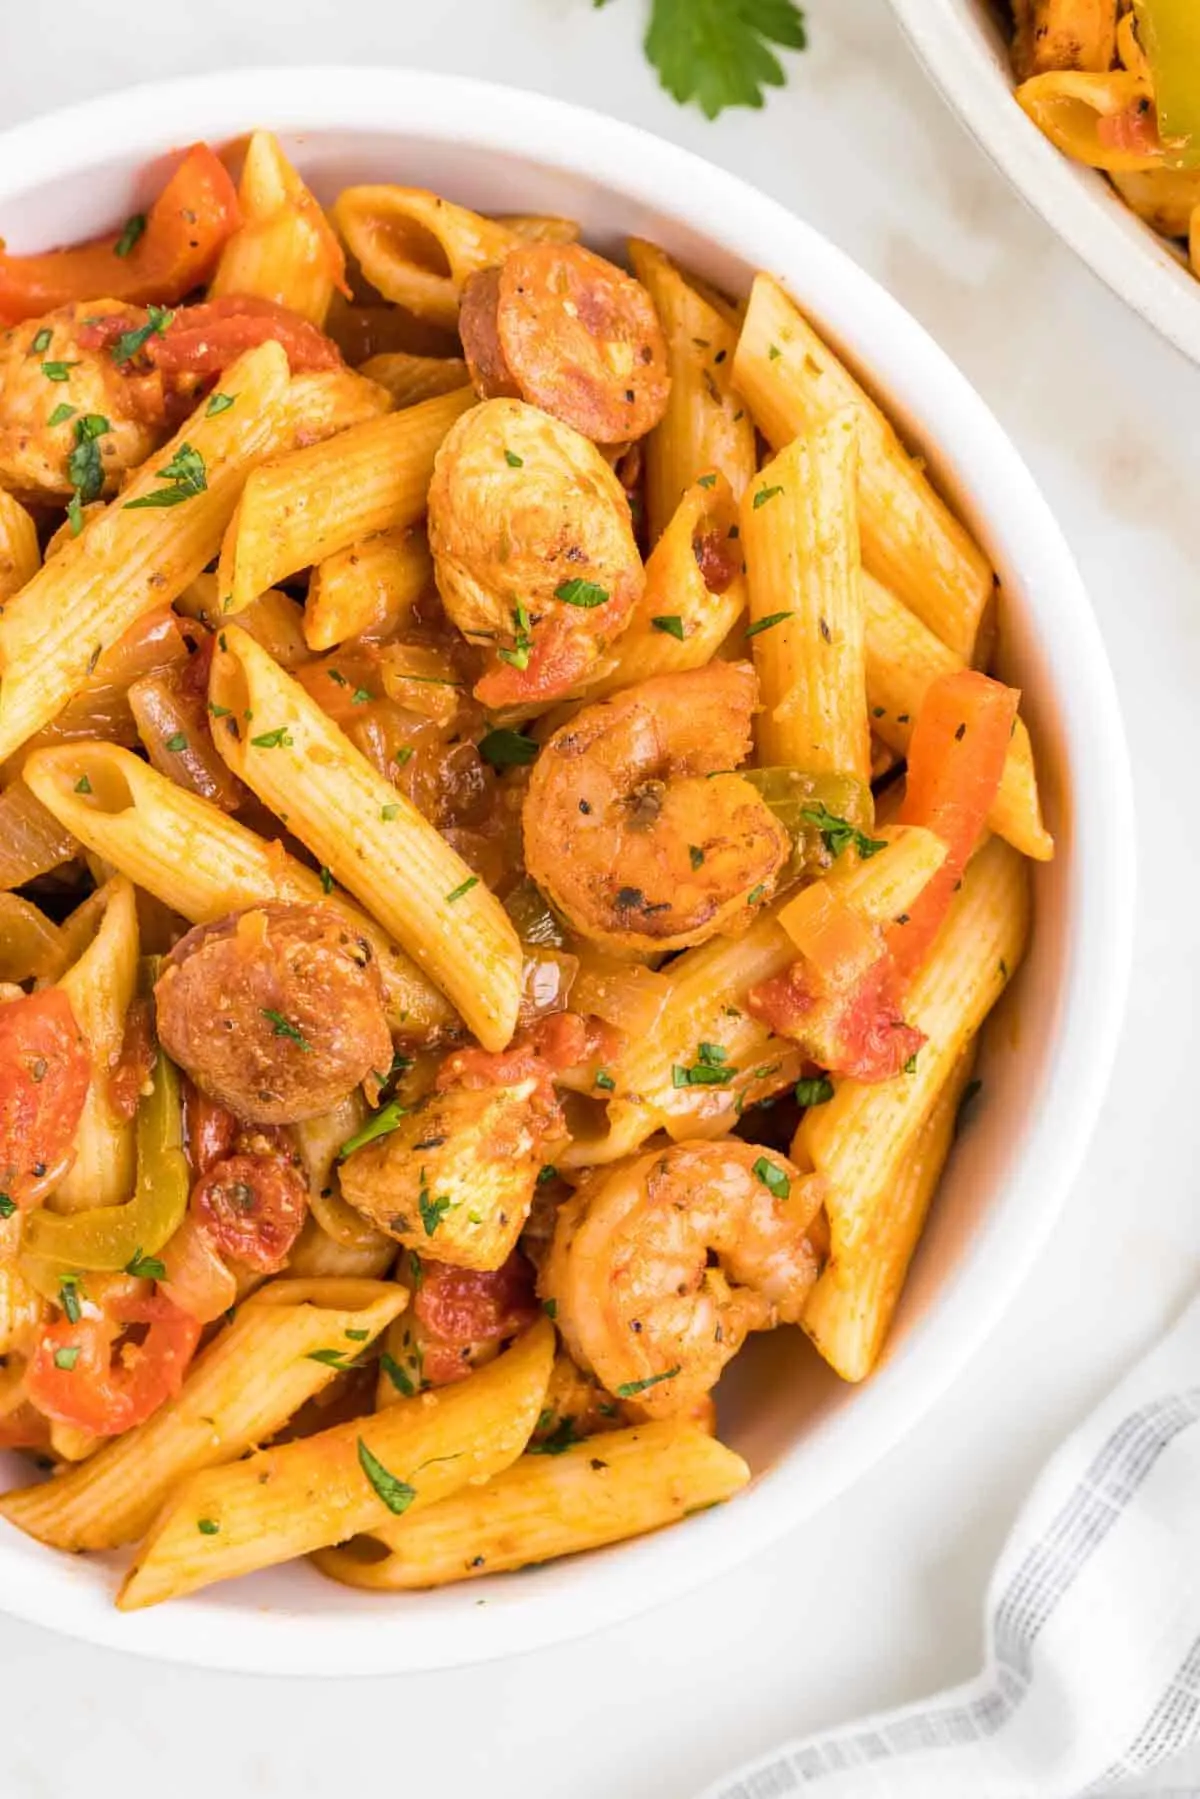 Jambalaya Pasta is a hearty penne pasta recipe loaded with bell peppers, shrimp, chicken breast chunks and andouille sausage all tossed in a tomato based sauce with a kick from some Cajun seasoning.